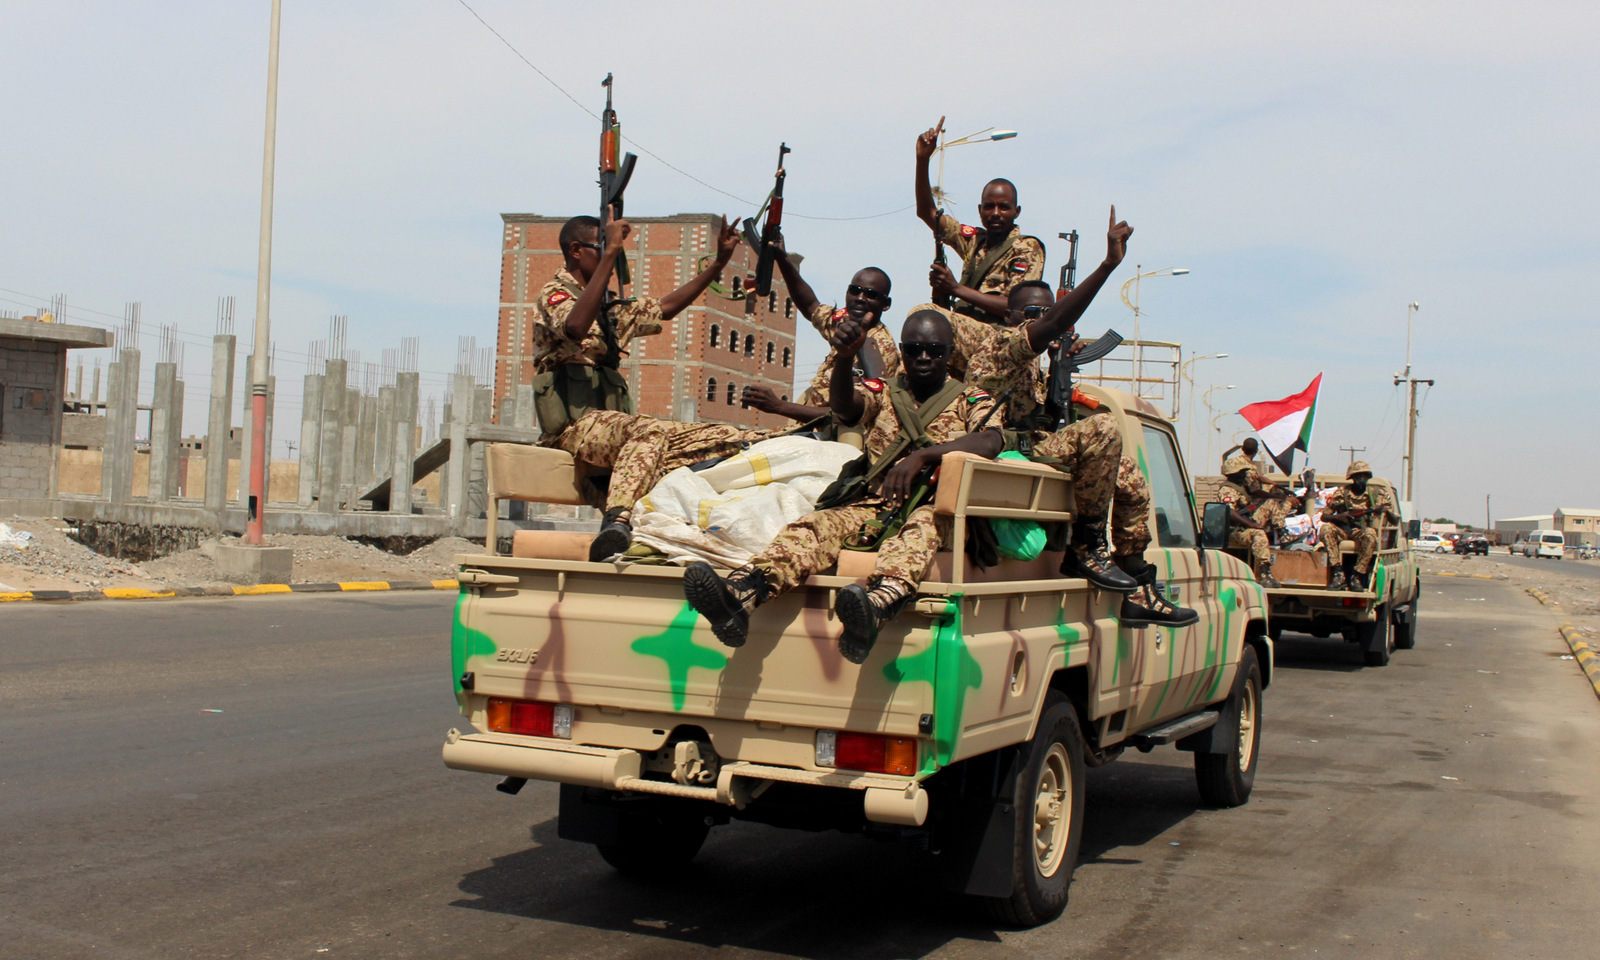 Sudanese soldiers on a military vehicle gesture as they arrive to the port city of Aden, Yemen, Nov. 9, 2015. (AP/Wael Qubady)